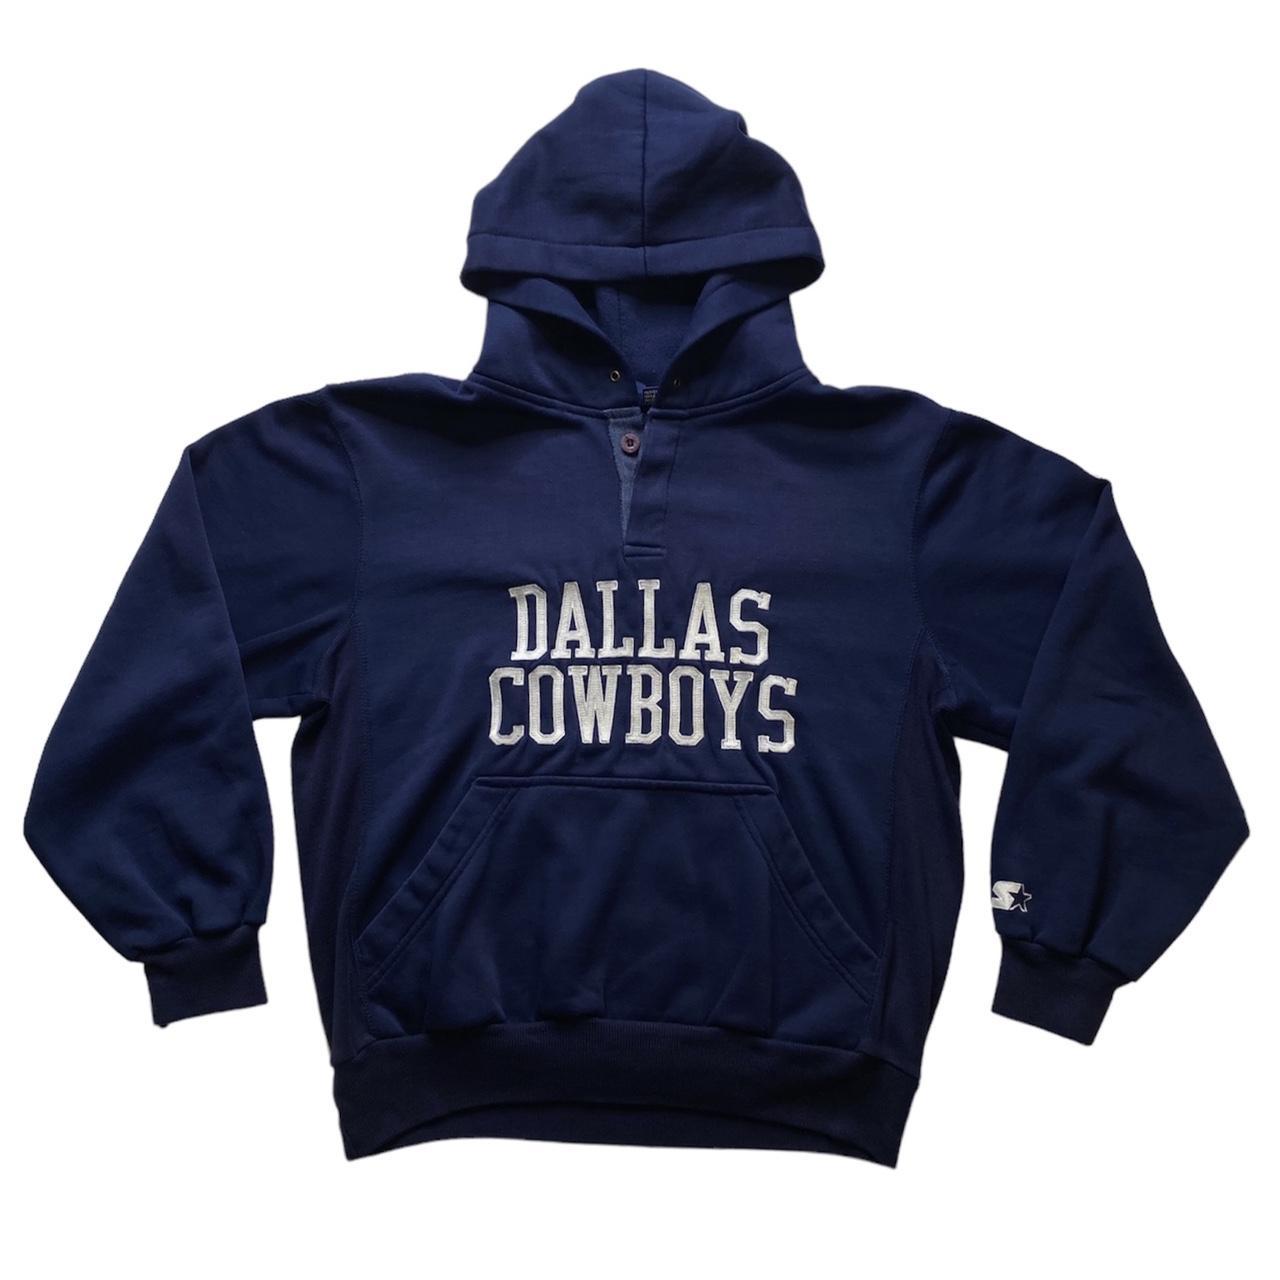 RARE Vintage 80s Distressed Dallas Cowboys by Starter 